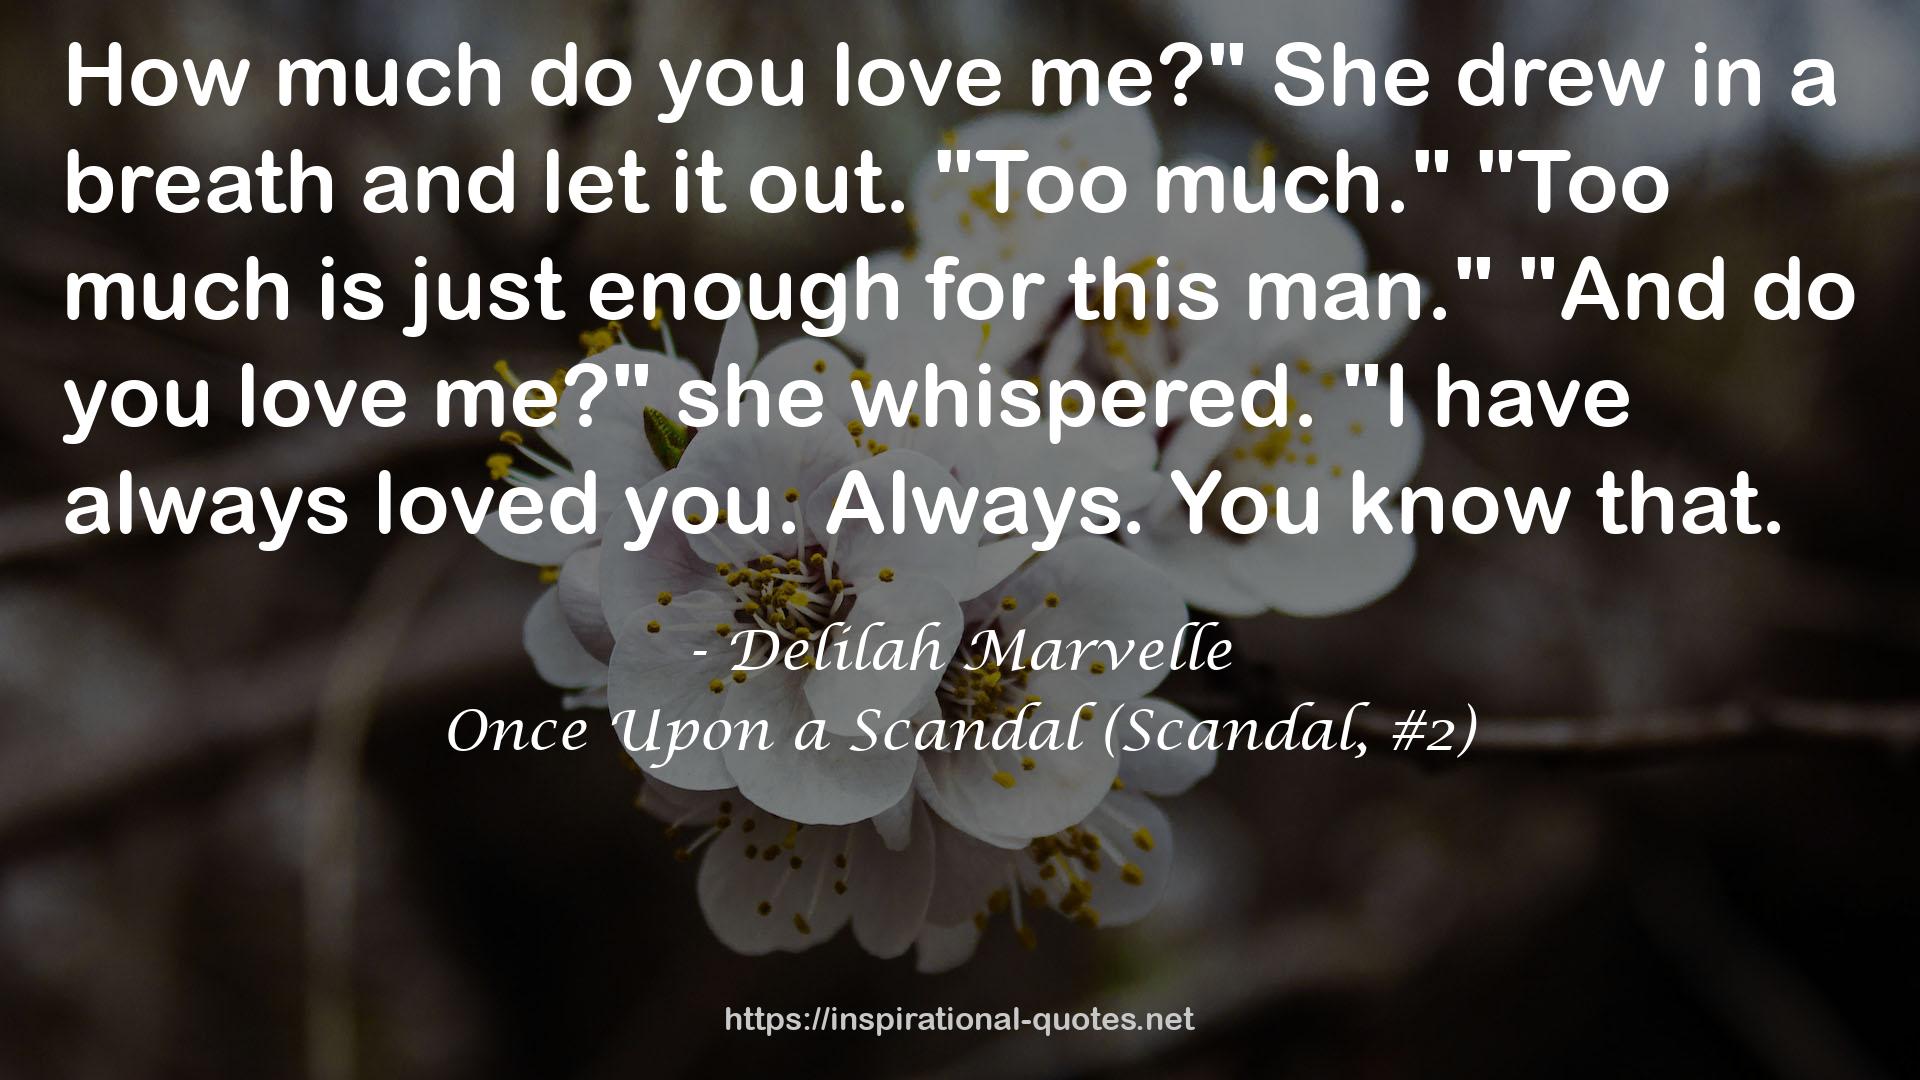 Once Upon a Scandal (Scandal, #2) QUOTES